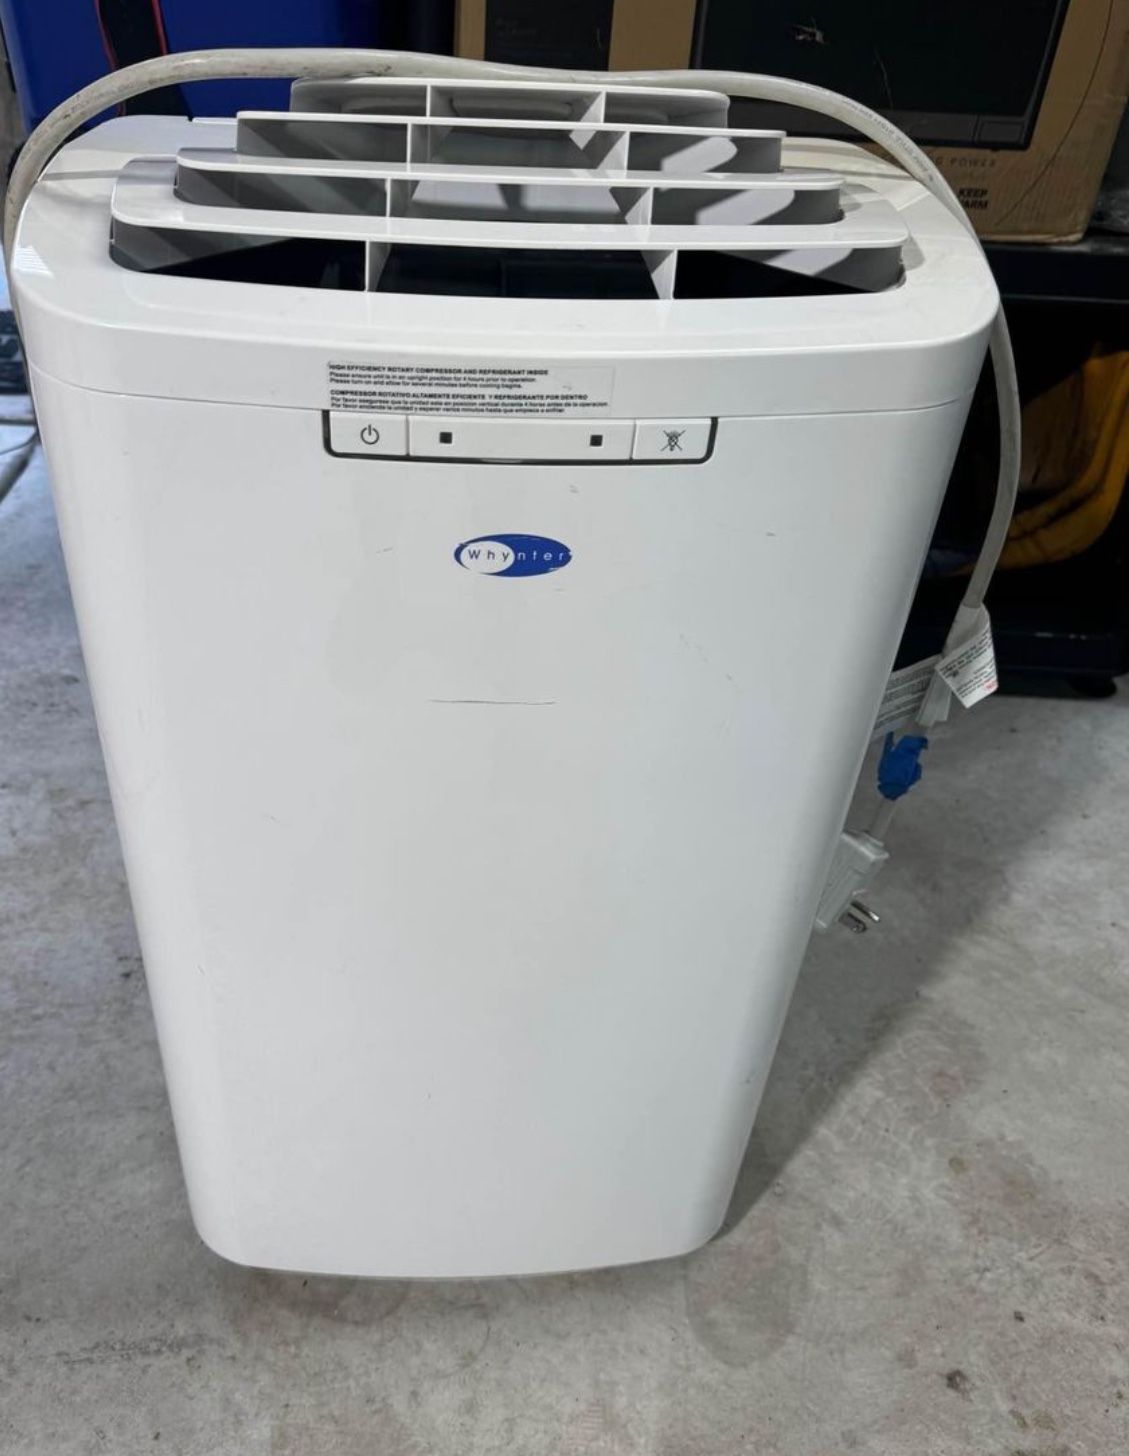 Whynter ARC-110WD 11,000 BTU Portable Air Conditioner with Dehumidifier and Fan for Rooms Up to 350